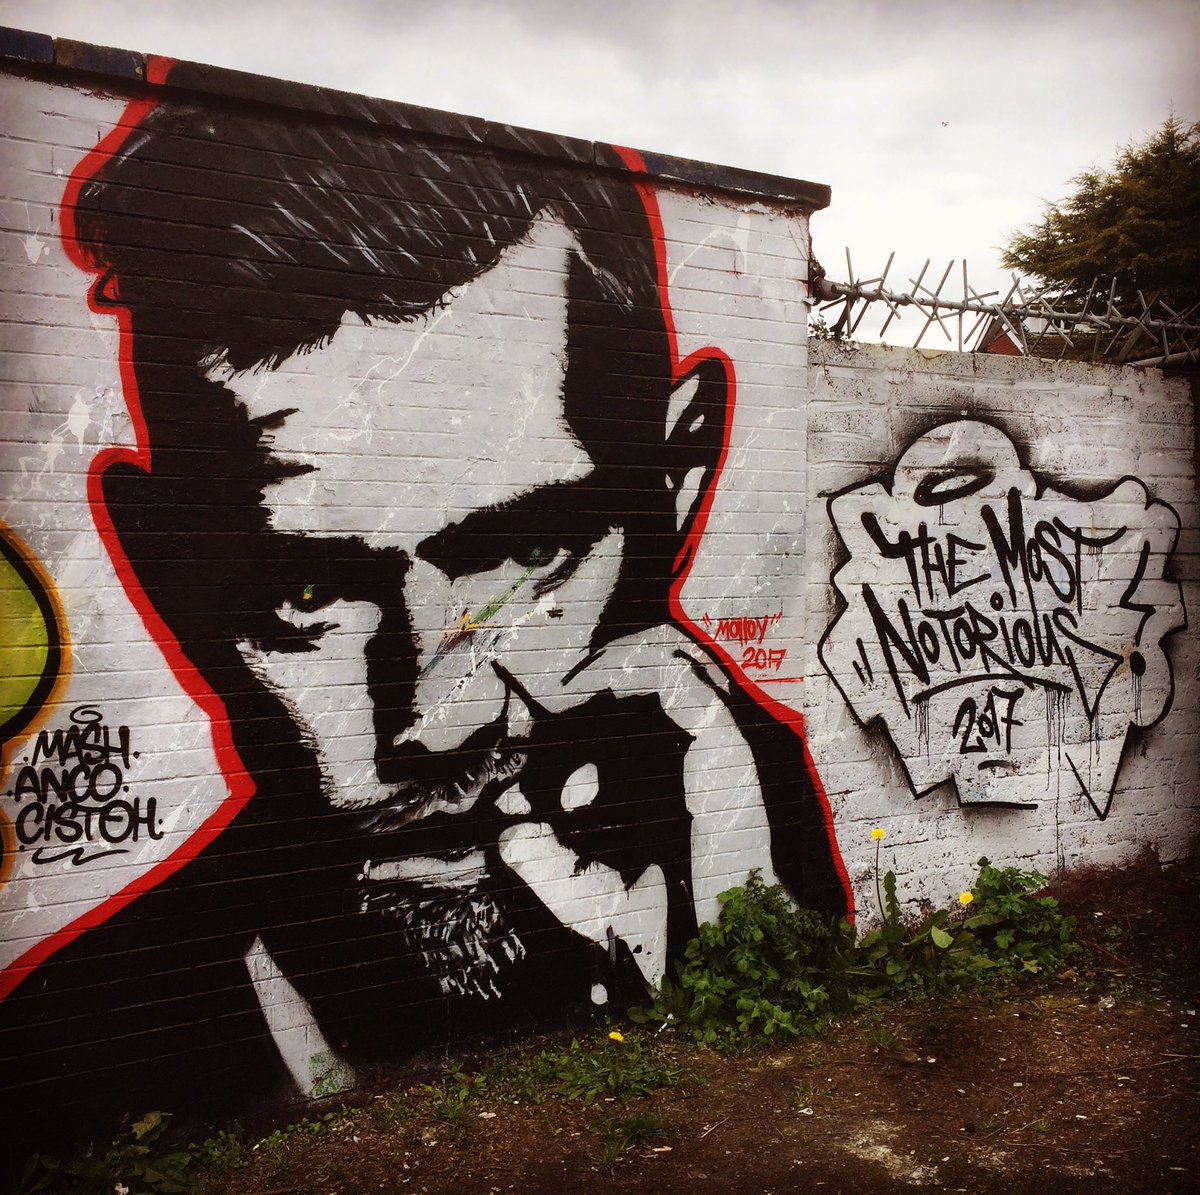 RT @xGogsx: Just spotted this in Belfast! @TheNotoriousMMA #ConorMcGregor https://t.co/5j0xqQRHHz